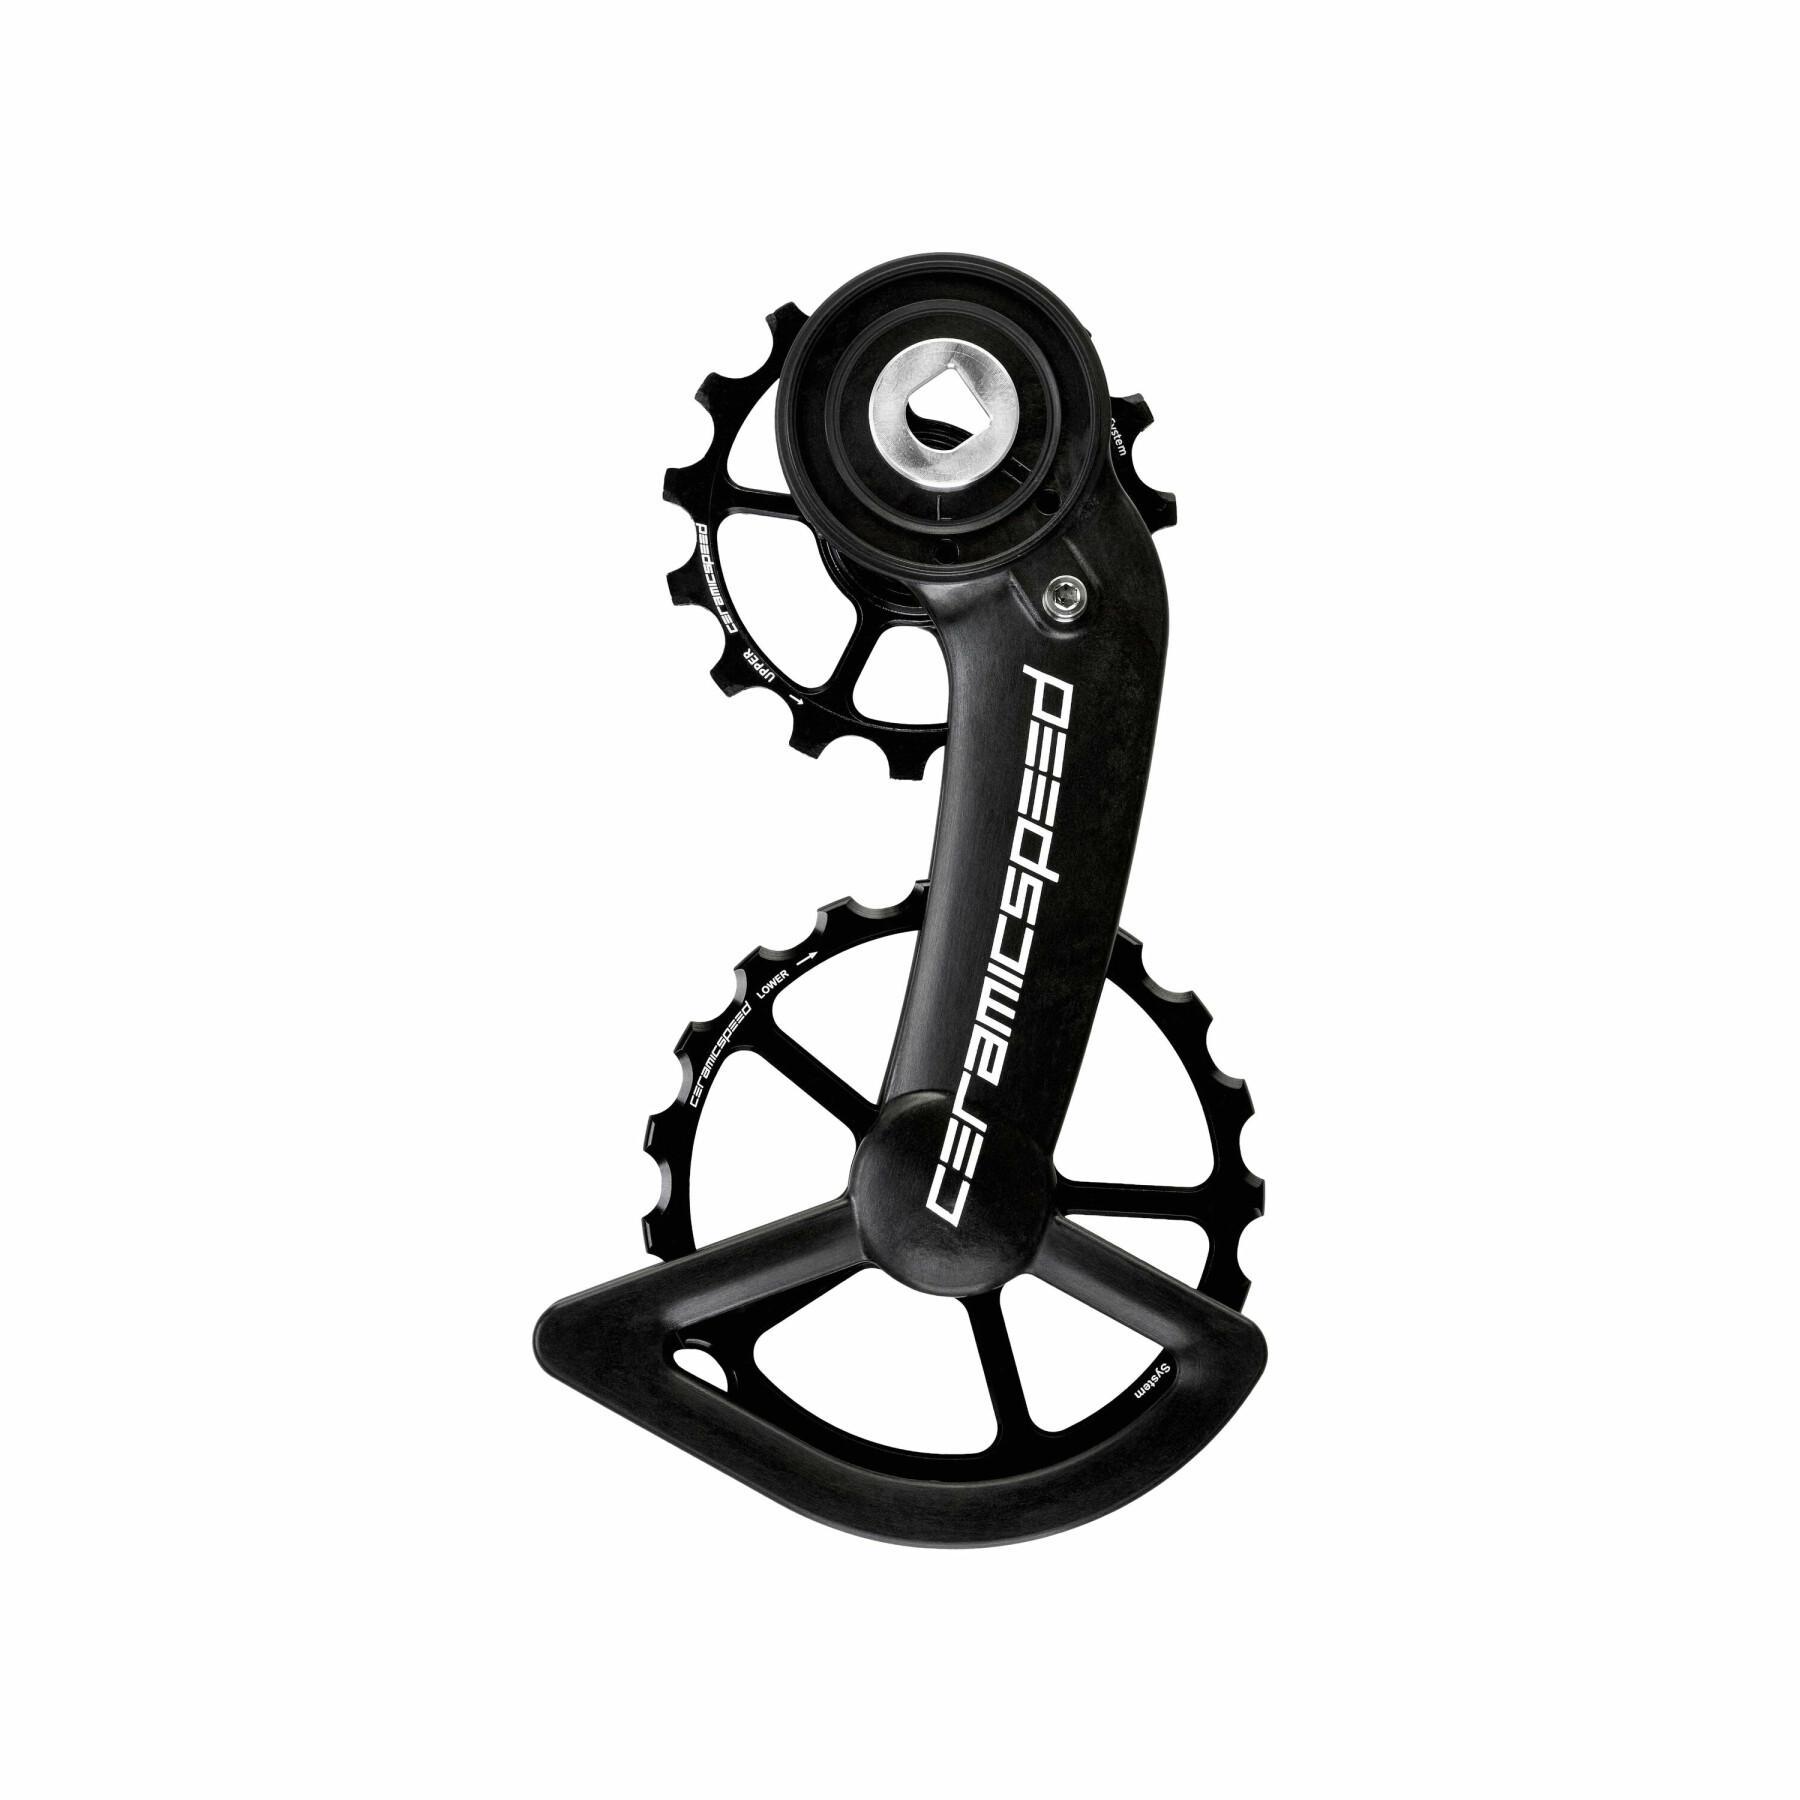 Screed CeramicSpeed OSPW coated Sram red/force axs